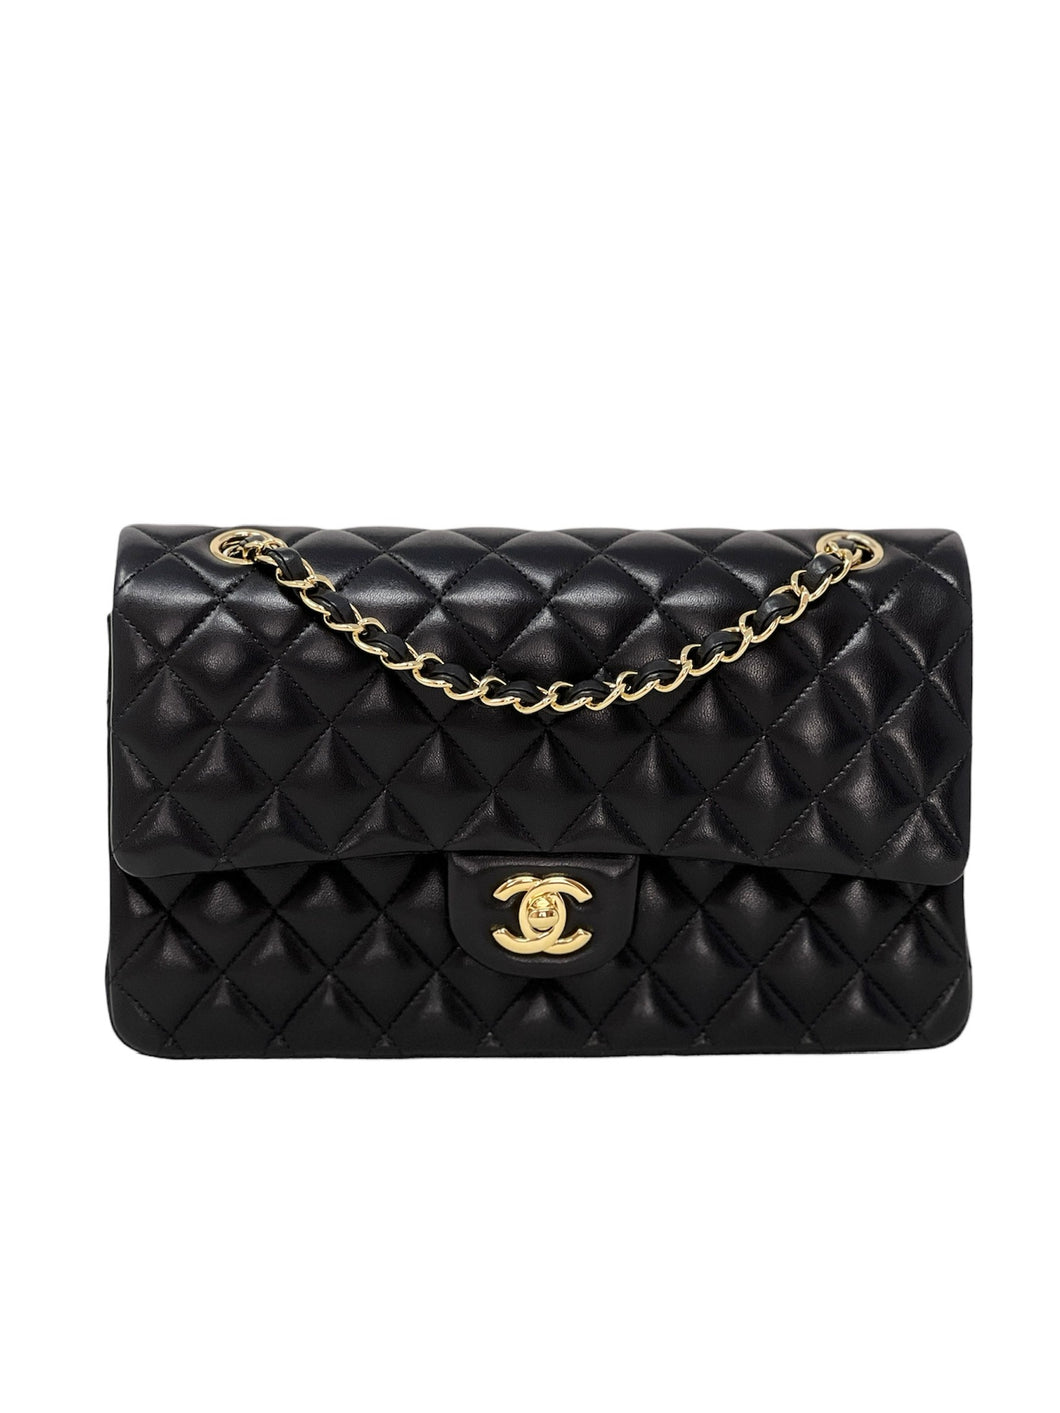 Chanel Timeless/Classic double flap shoulder bag in black quilted